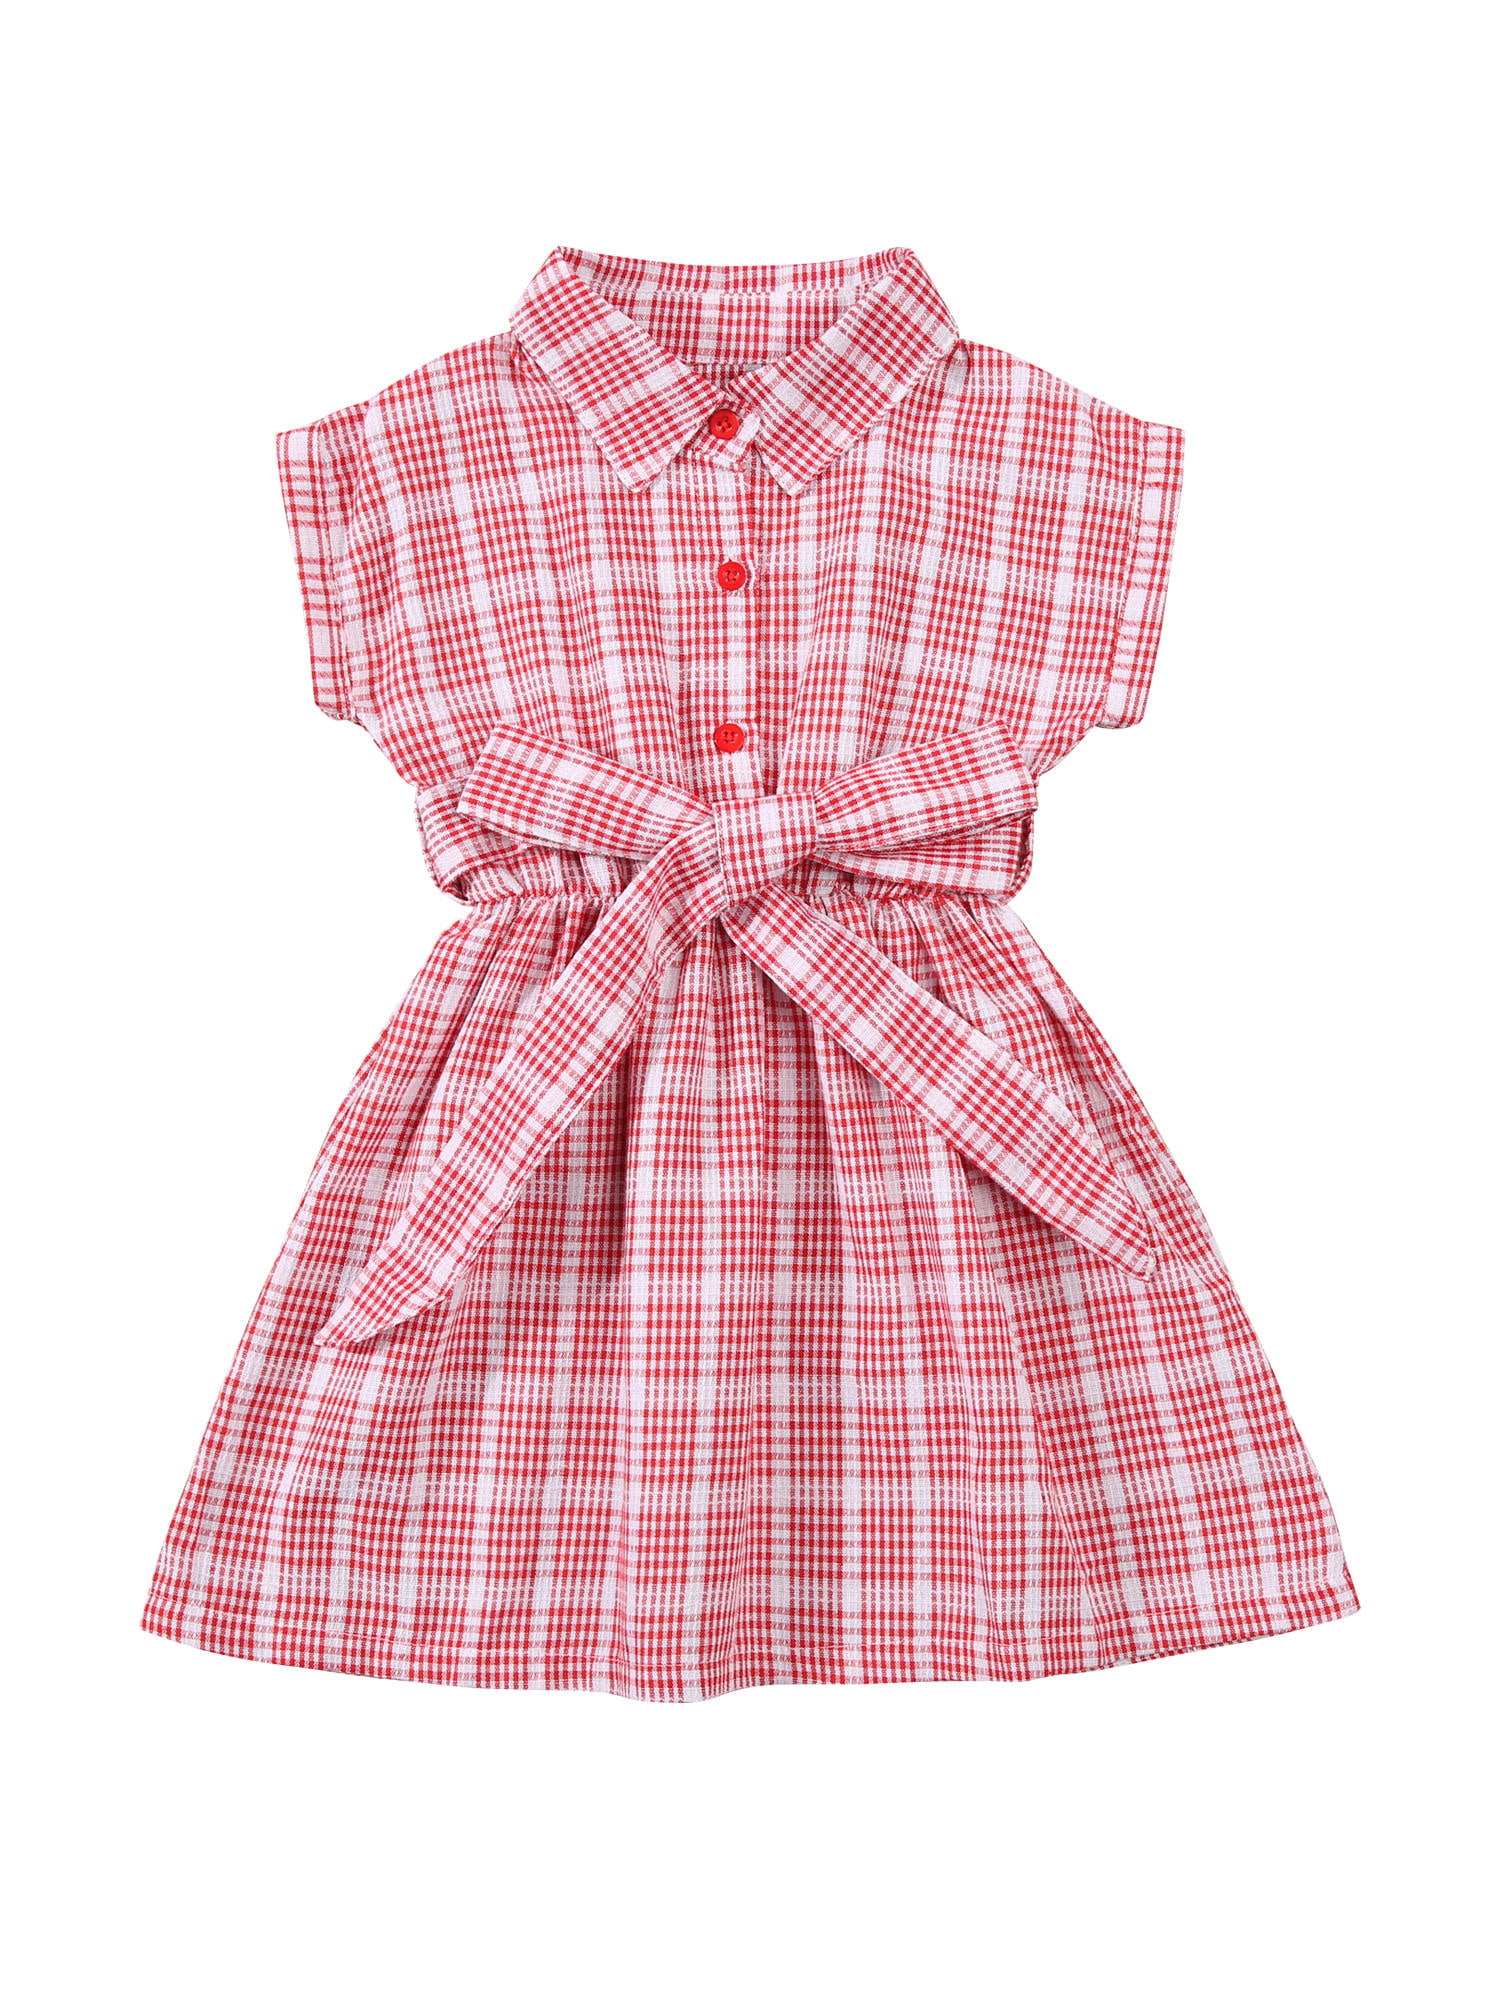 Summer Kids Infant Girls Babies Toddlers Fly sleeve Checked Plaid Comfy Dress